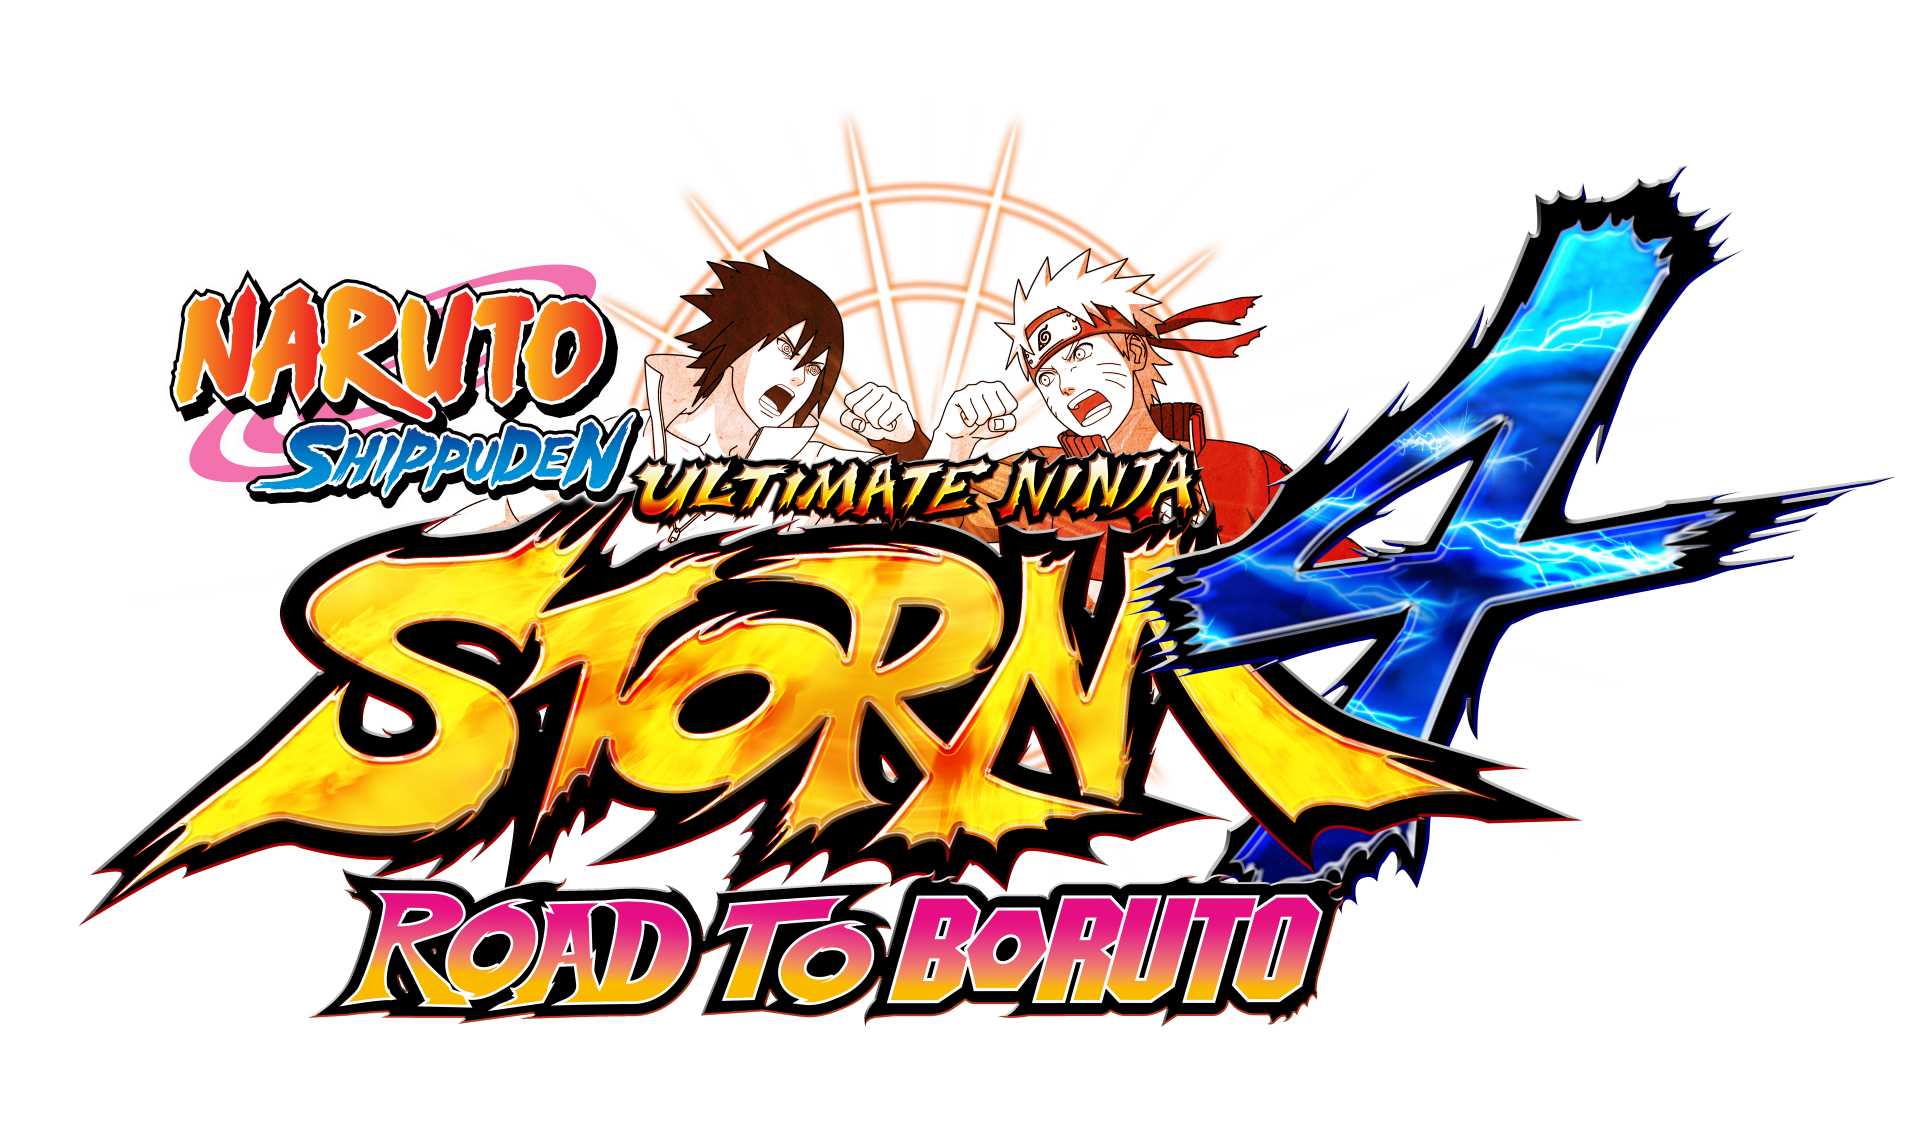 New 'Naruto' Game Coming? Trademark For 'Road To Boruto' Appears Online